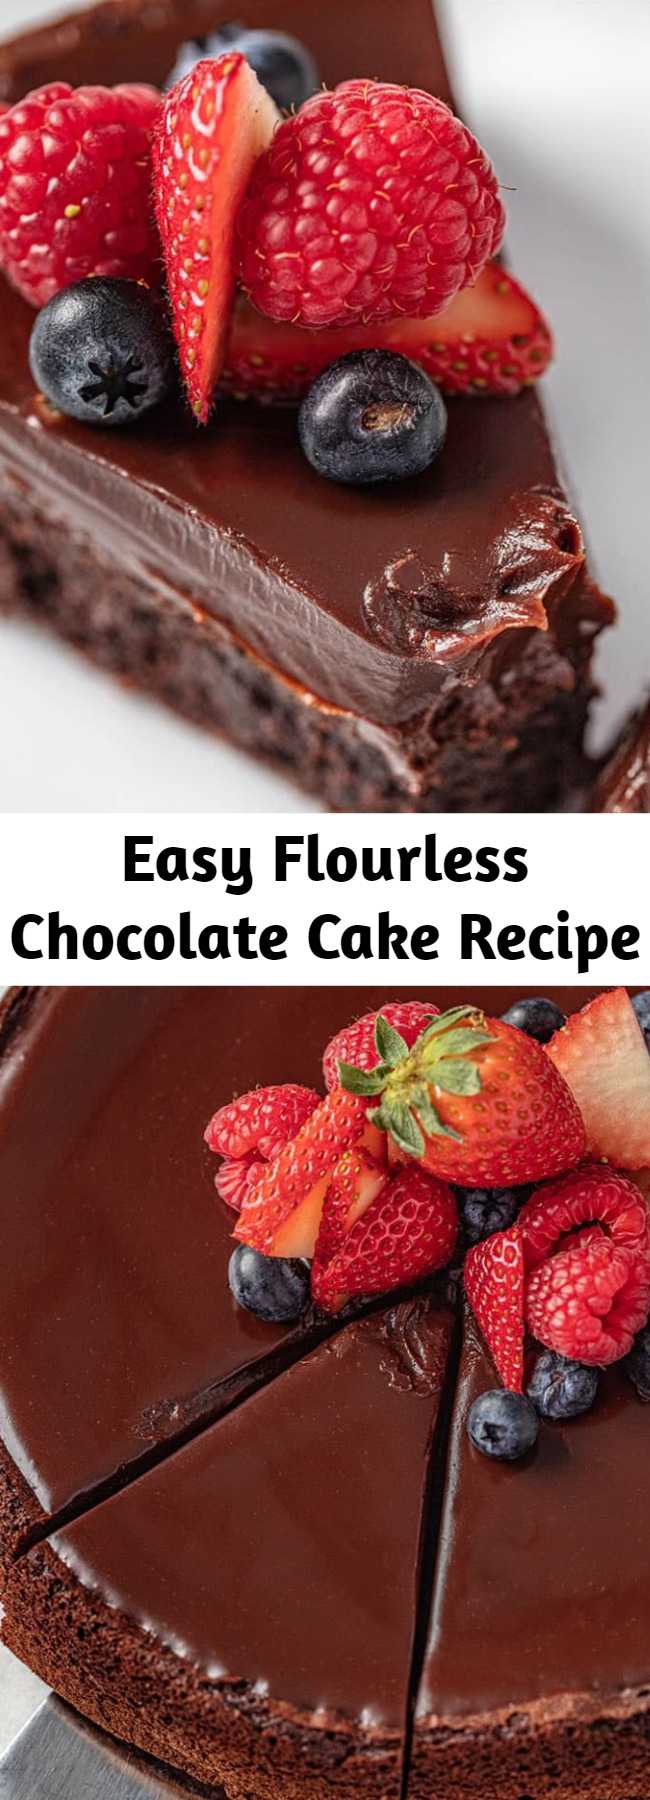 Easy Flourless Chocolate Cake Recipe - Flourless Chocolate Cake is rich, dense, and fudgy and incredibly easy to make. It's a classic chocolate cake recipe that also just so happens to be gluten-free.